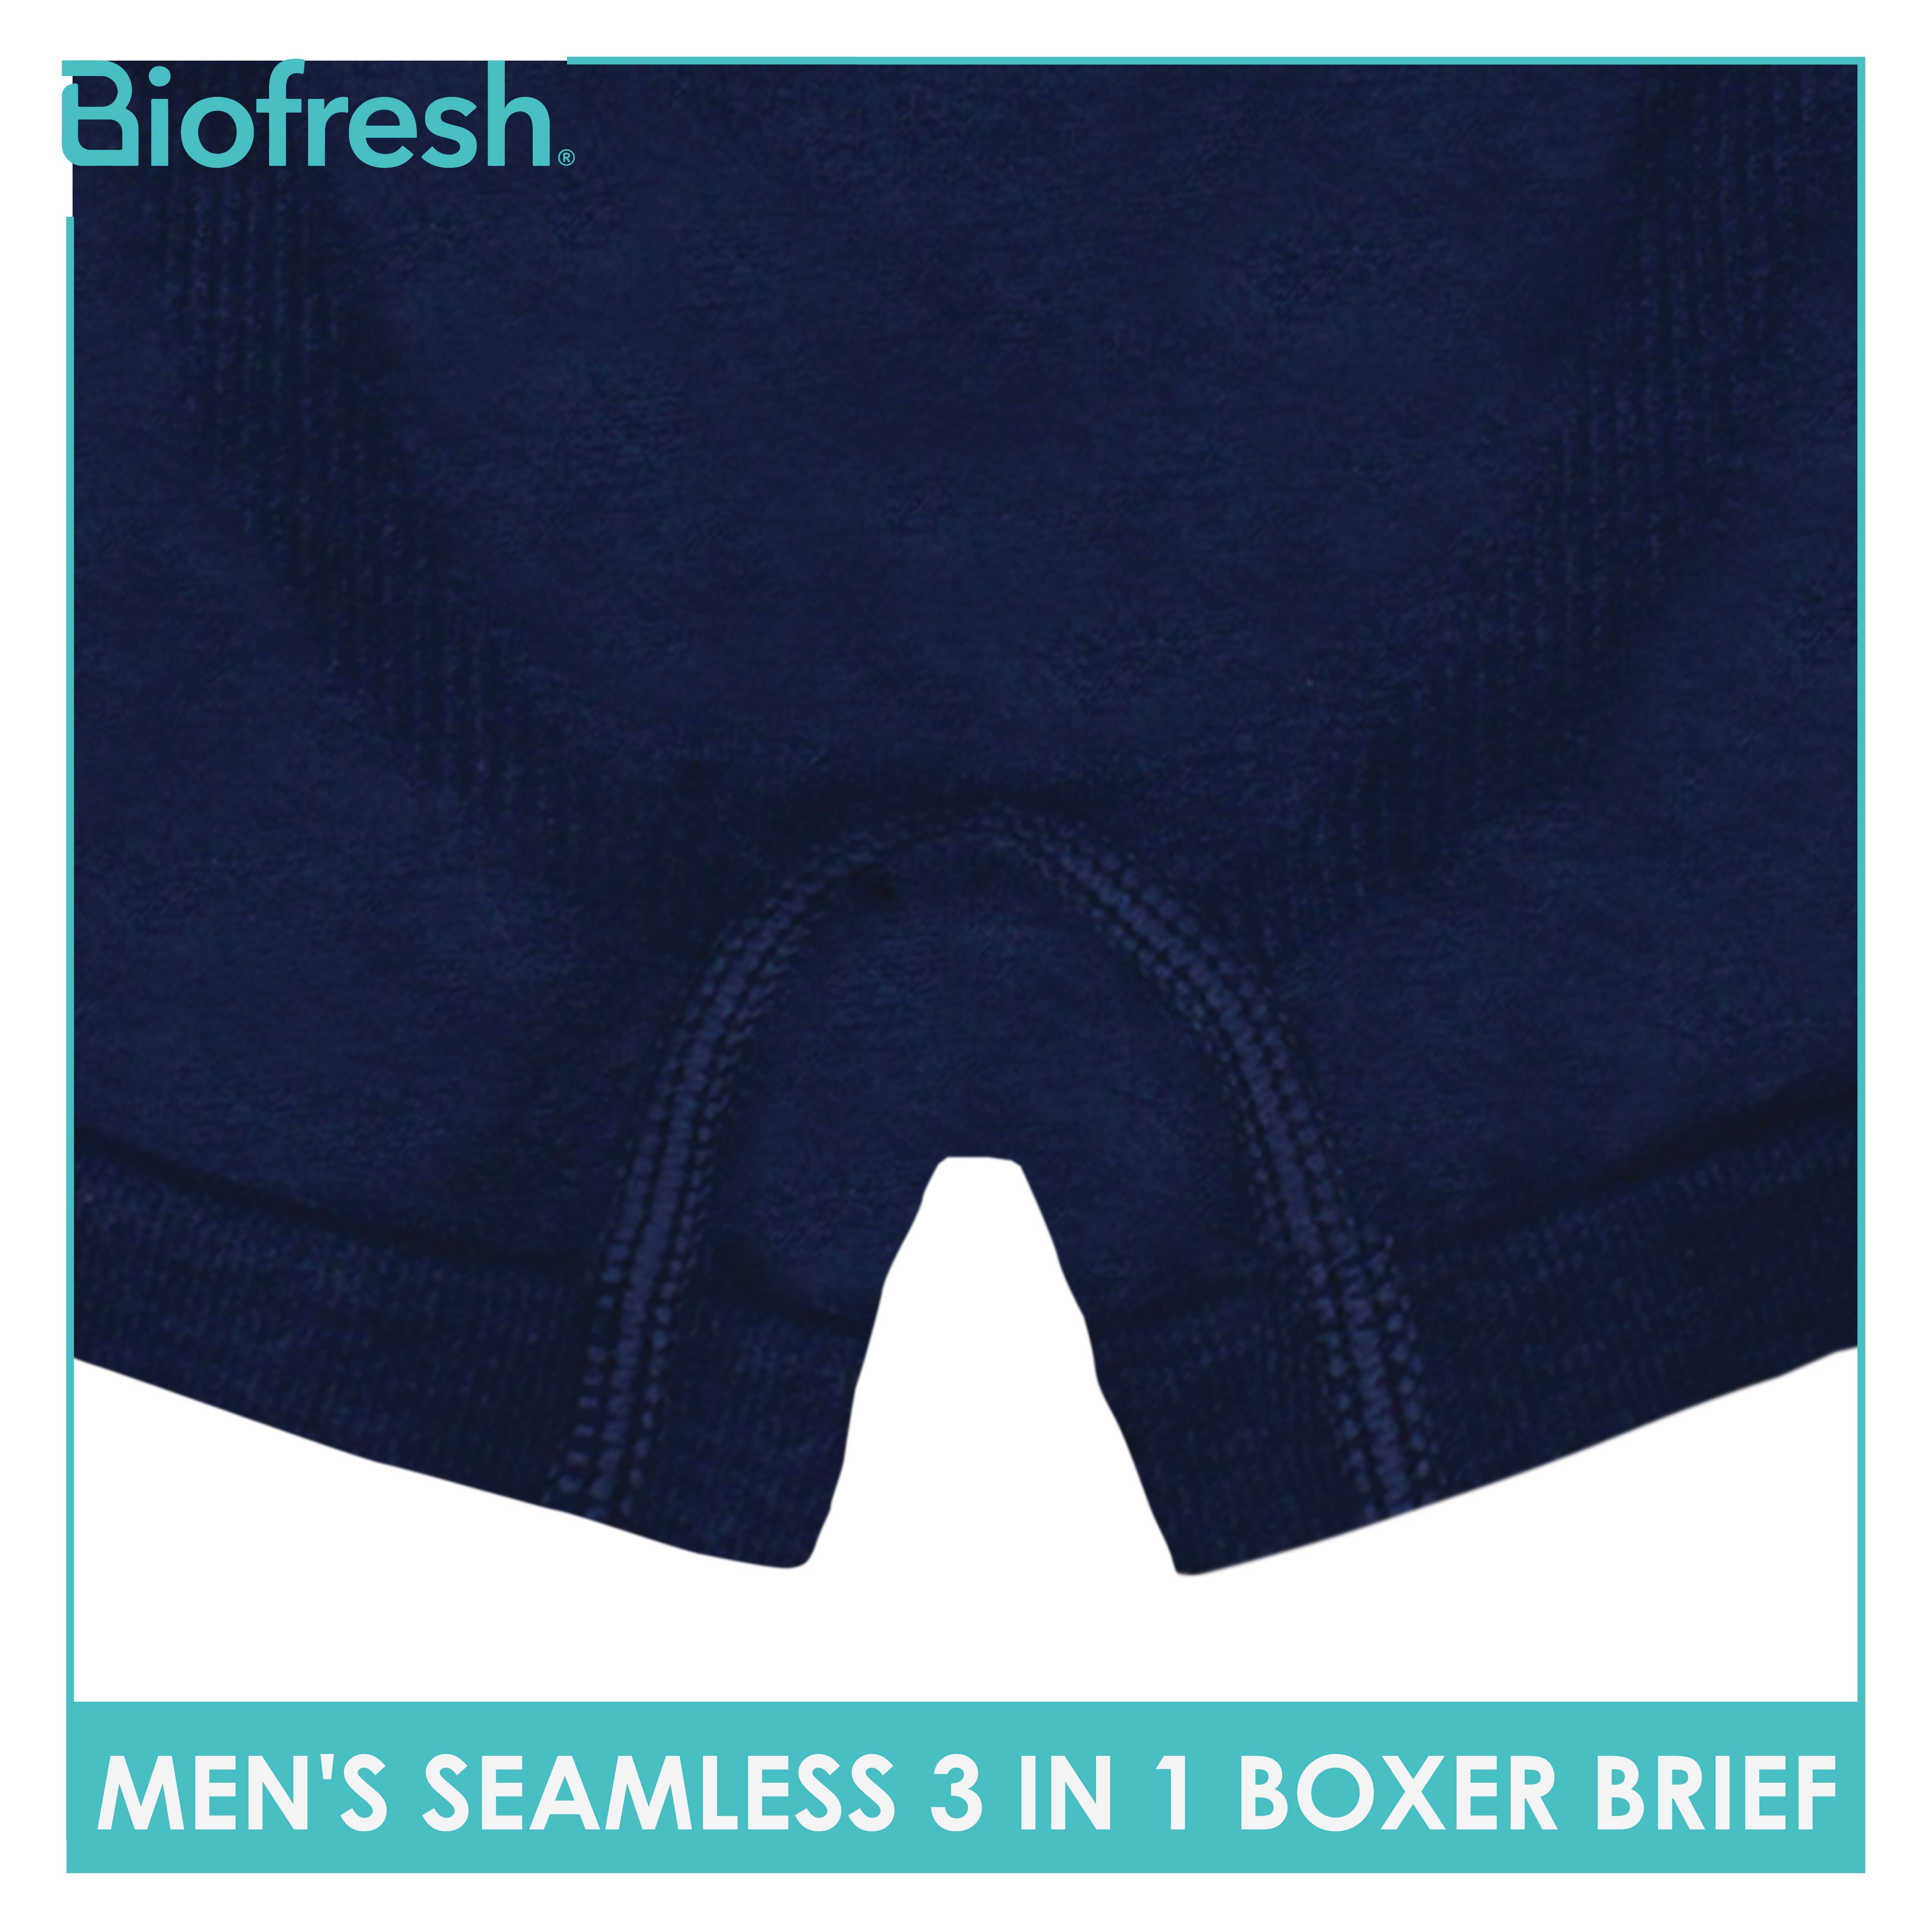 Biofresh Men's Antimicrobial Cotton Boxer Brief 1 piece in a pack